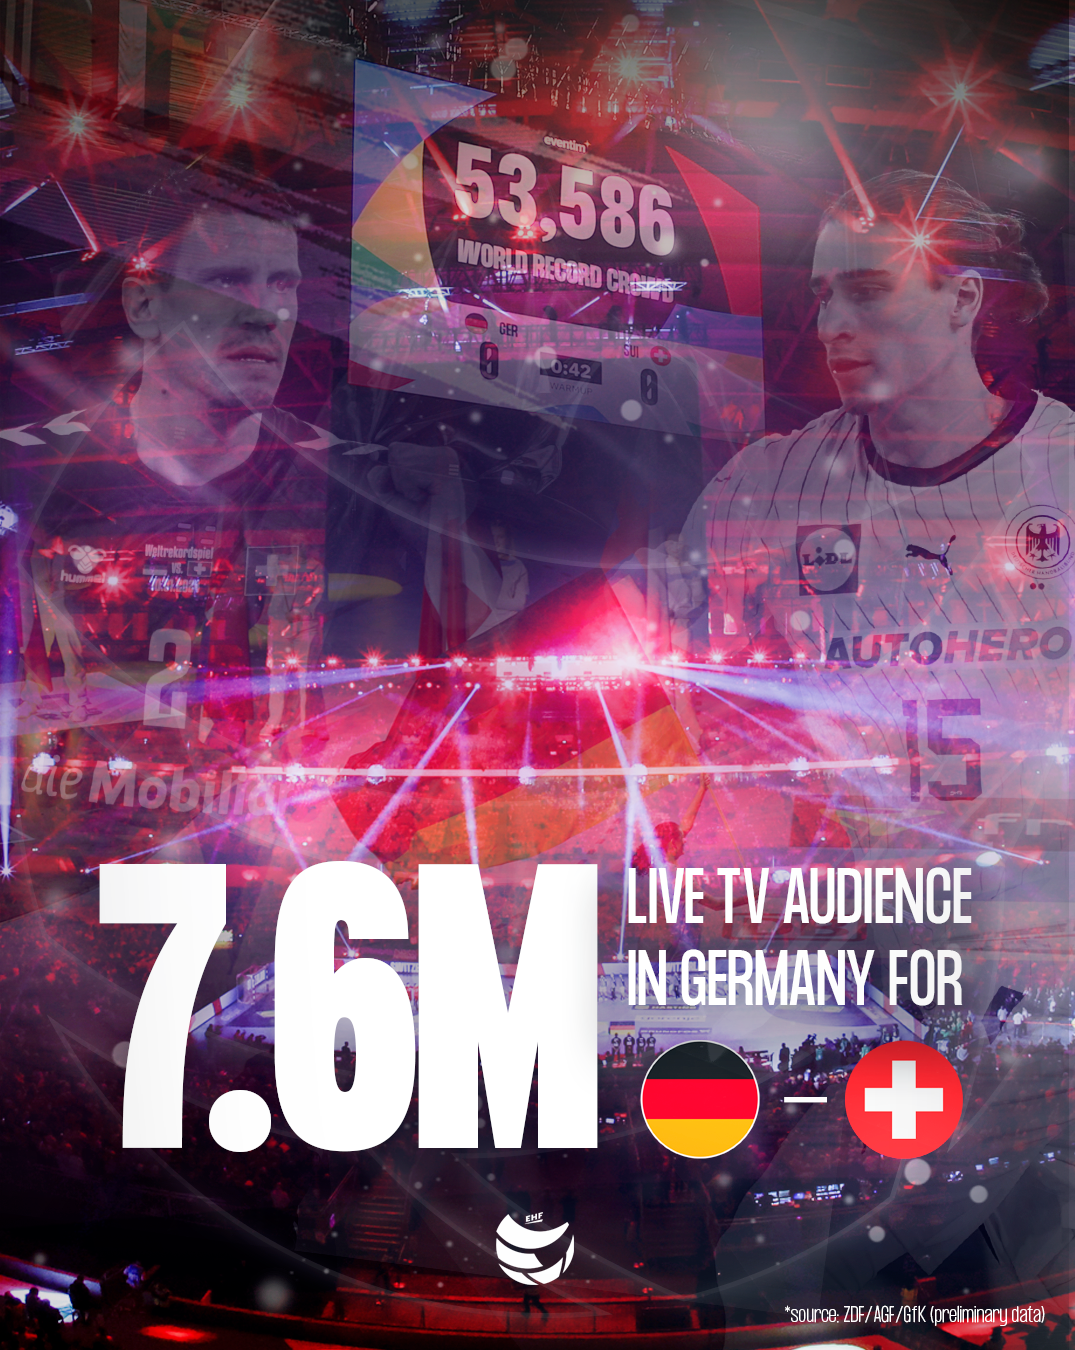 7.6m TV viewers watched Germany beat Switzerland on Wednesday